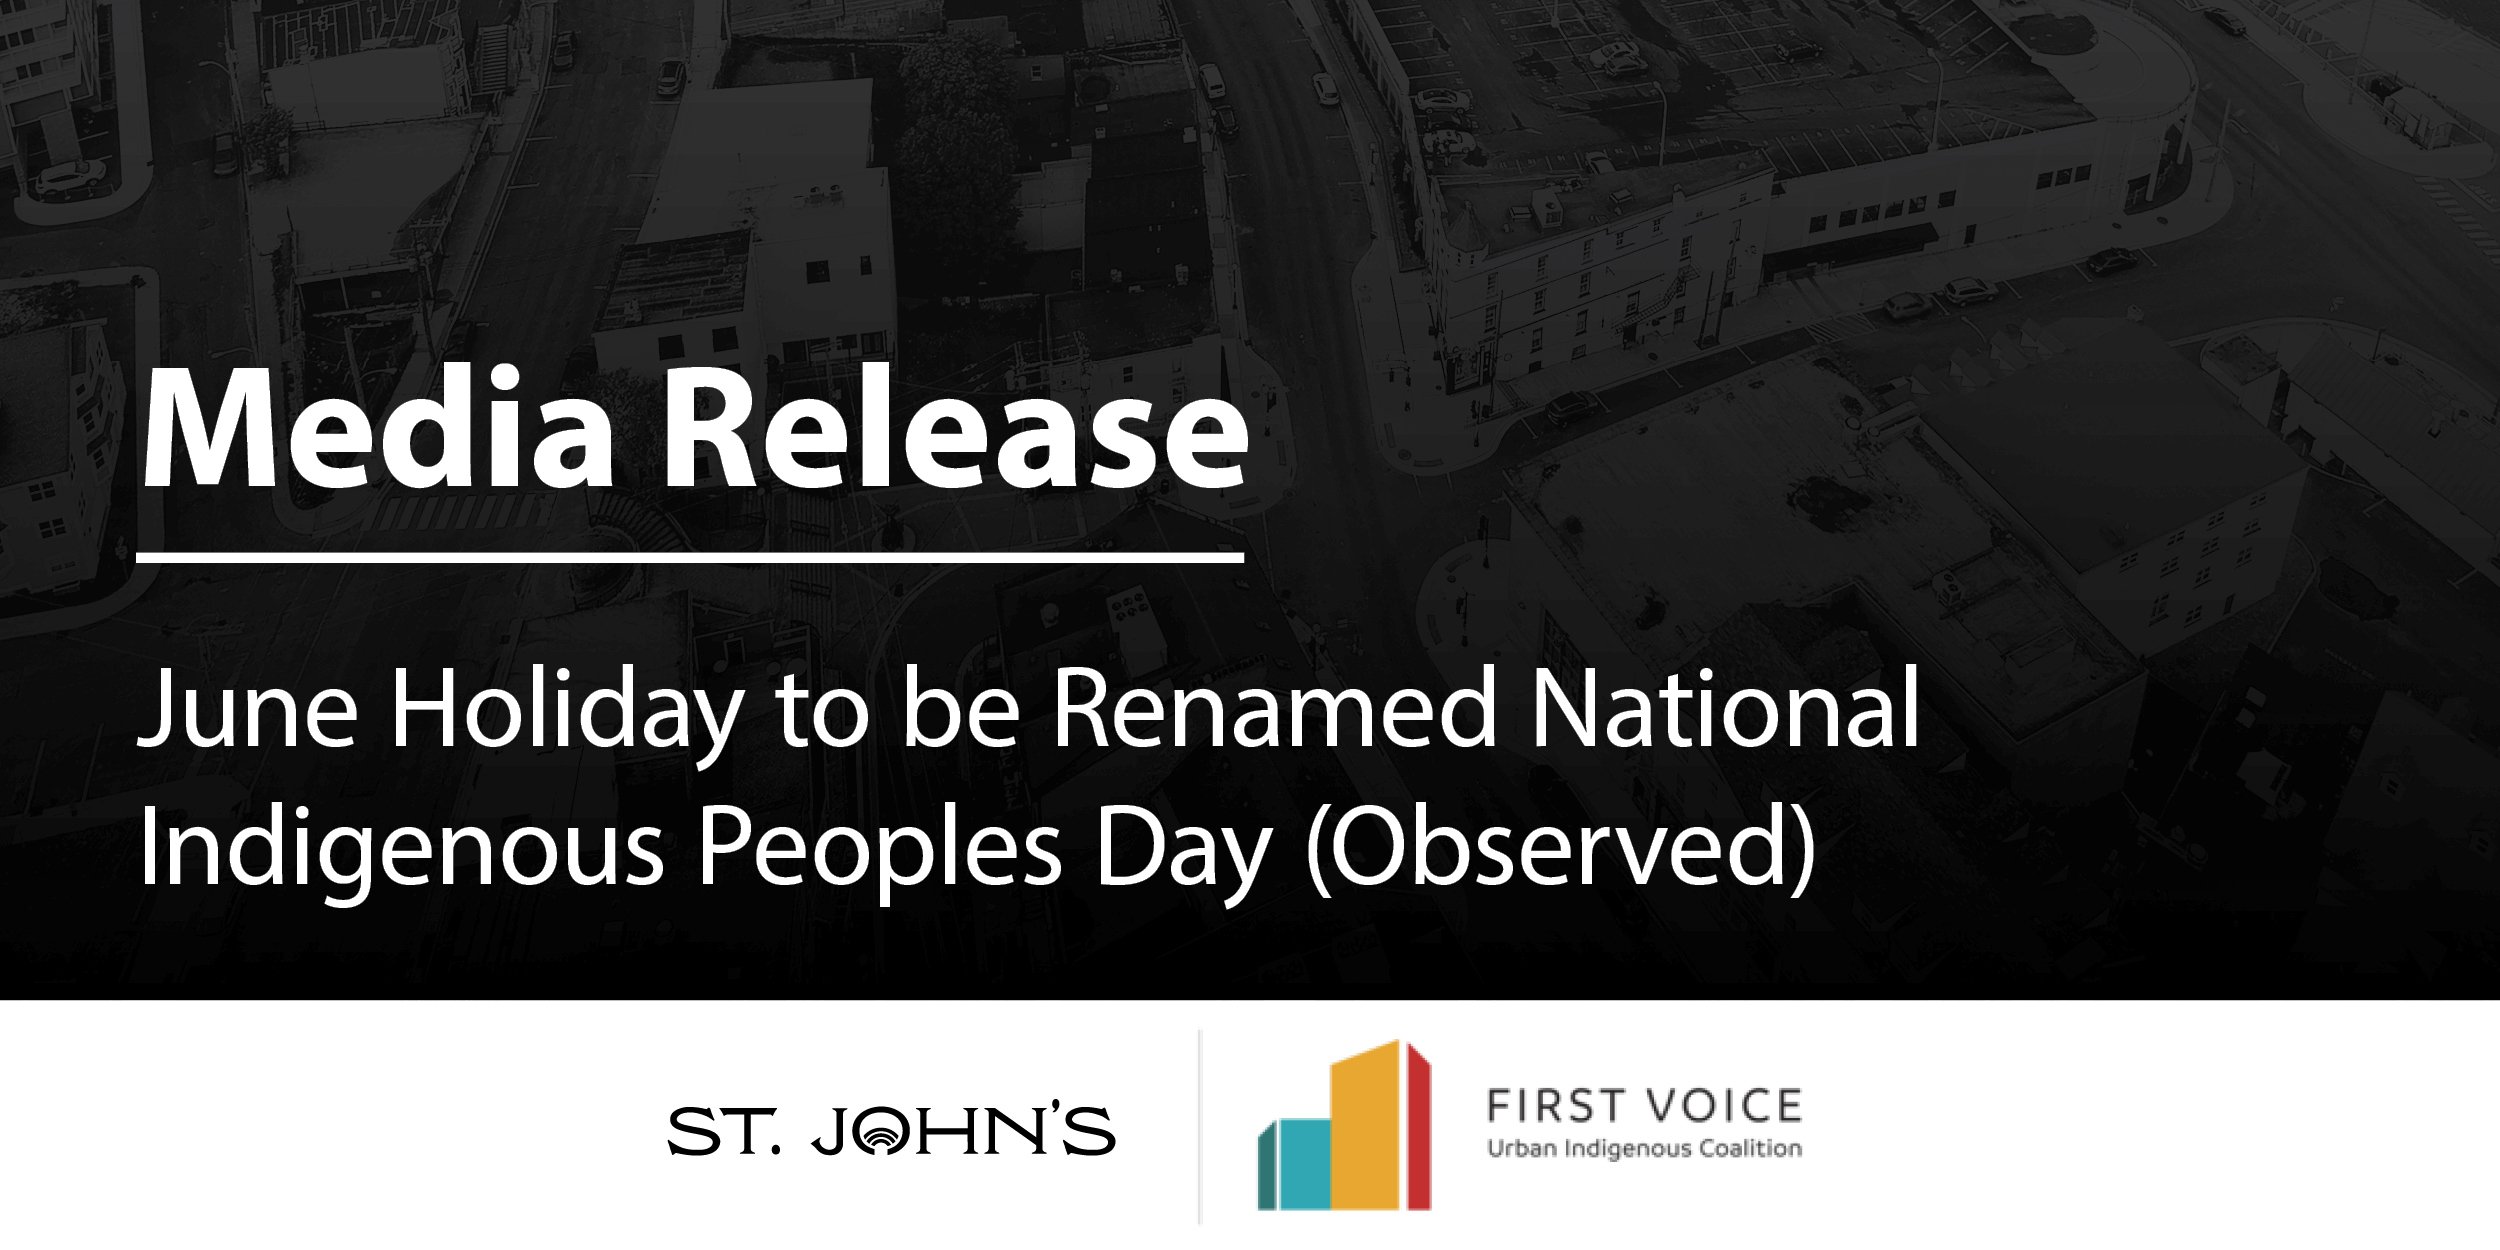 Dark background with white text "Media Release June Holiday to be Renamed National Indigenous Peoples Day (Observed)"